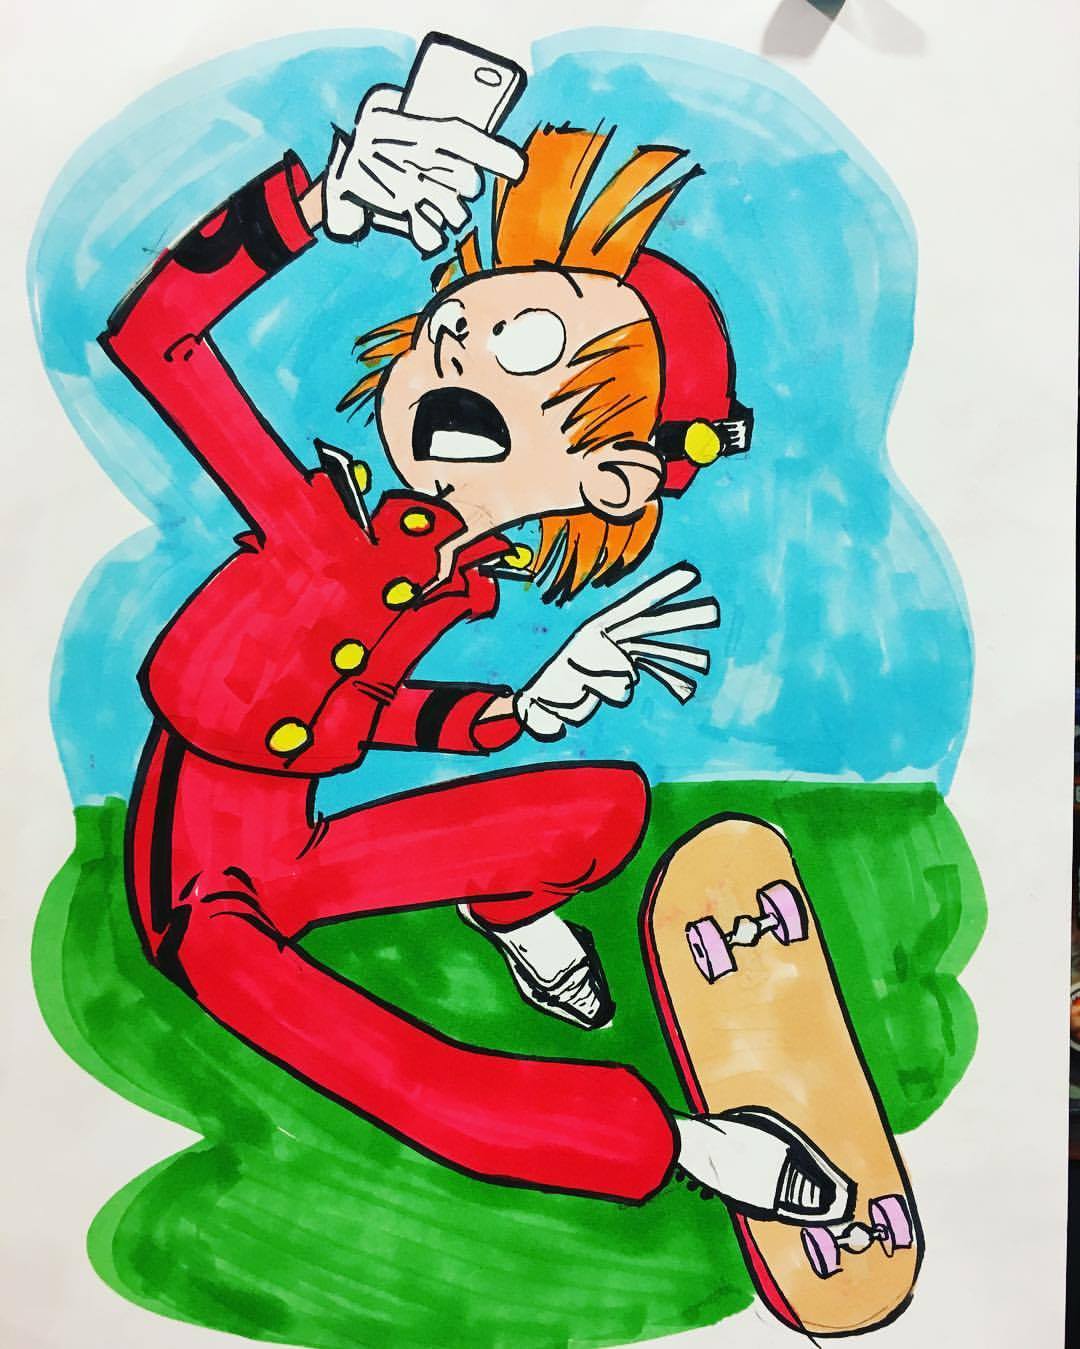 Spirou on skateboard taking selfie (ill. Mikael Göransson; Copyright (c) 2016 by the artist; Spirou (c) Dupuis; image from facebook.com)